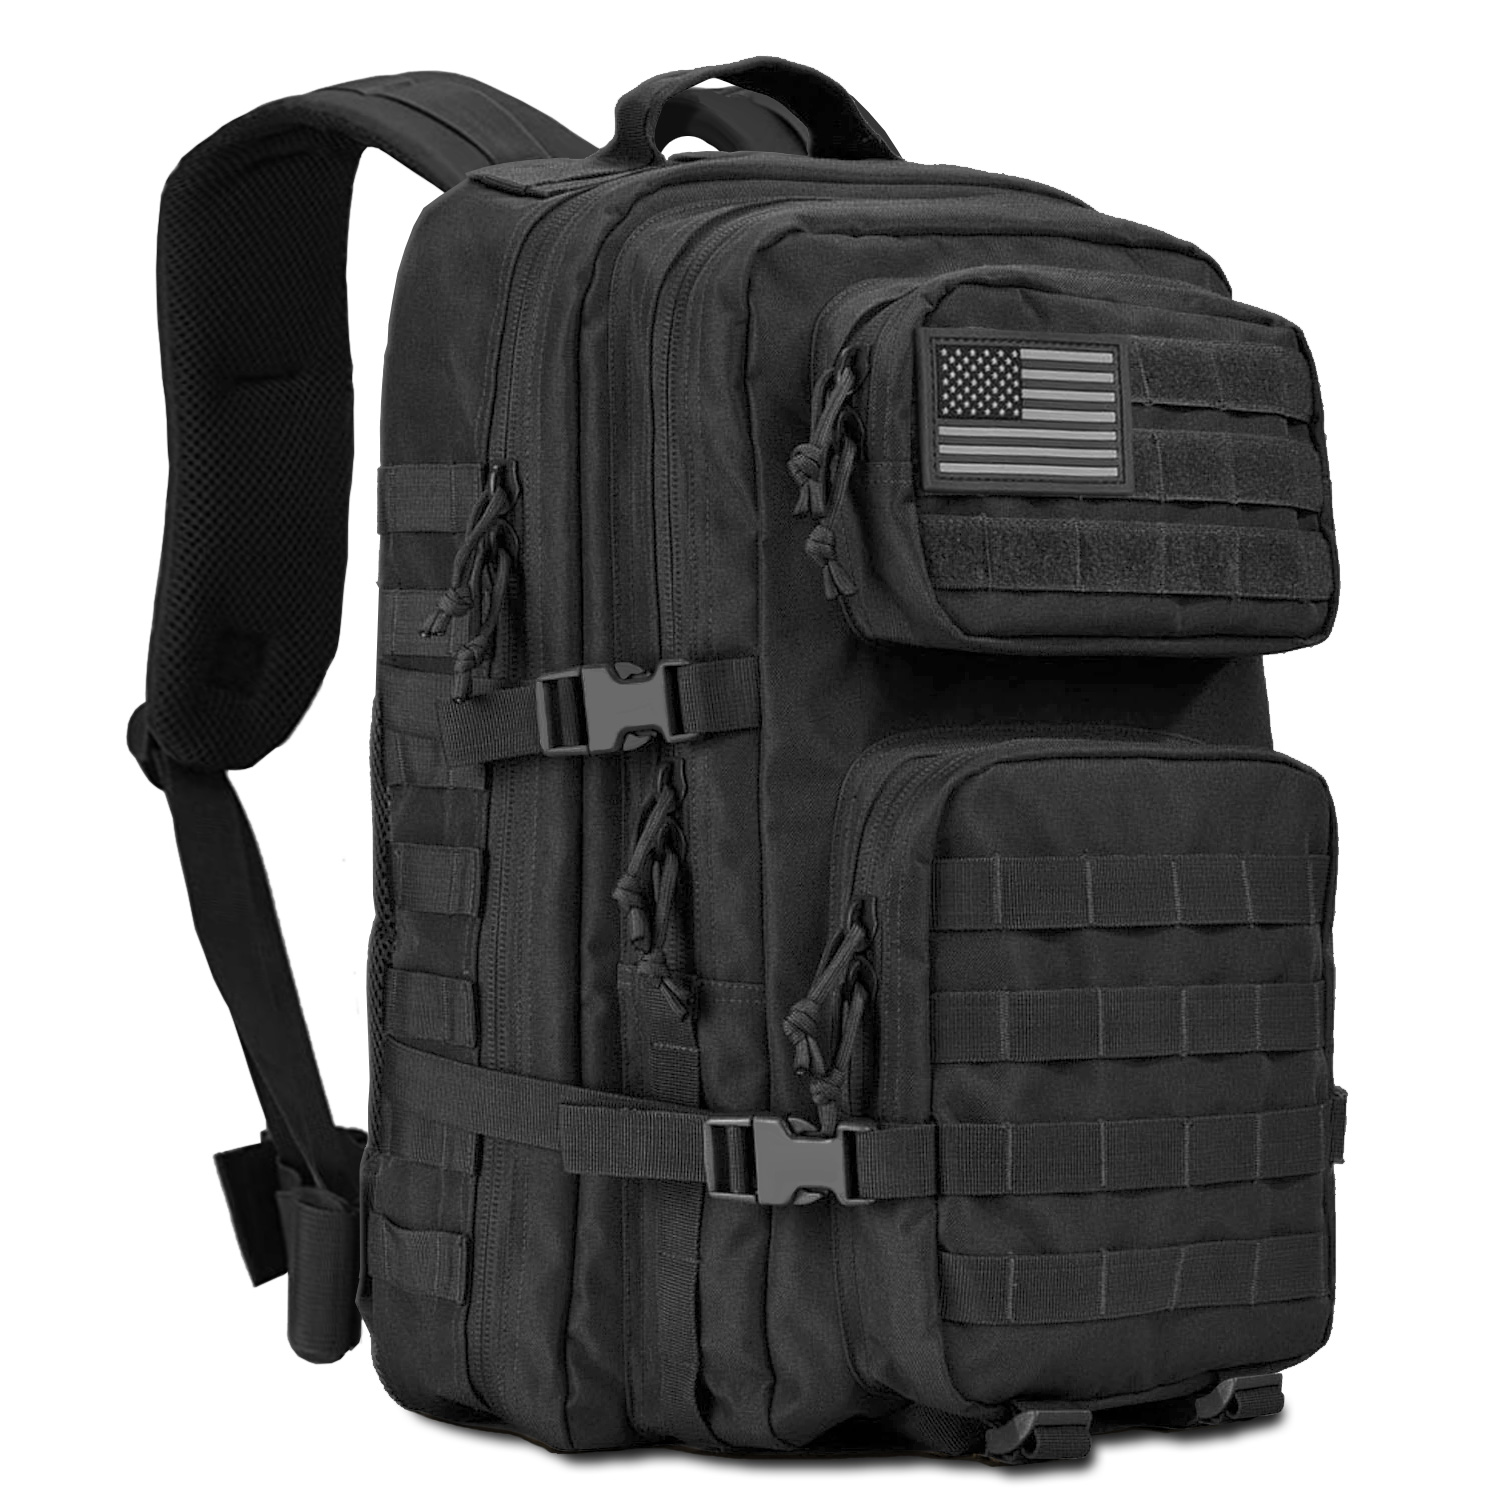 Best Men's Molle Military Tactical Backpack